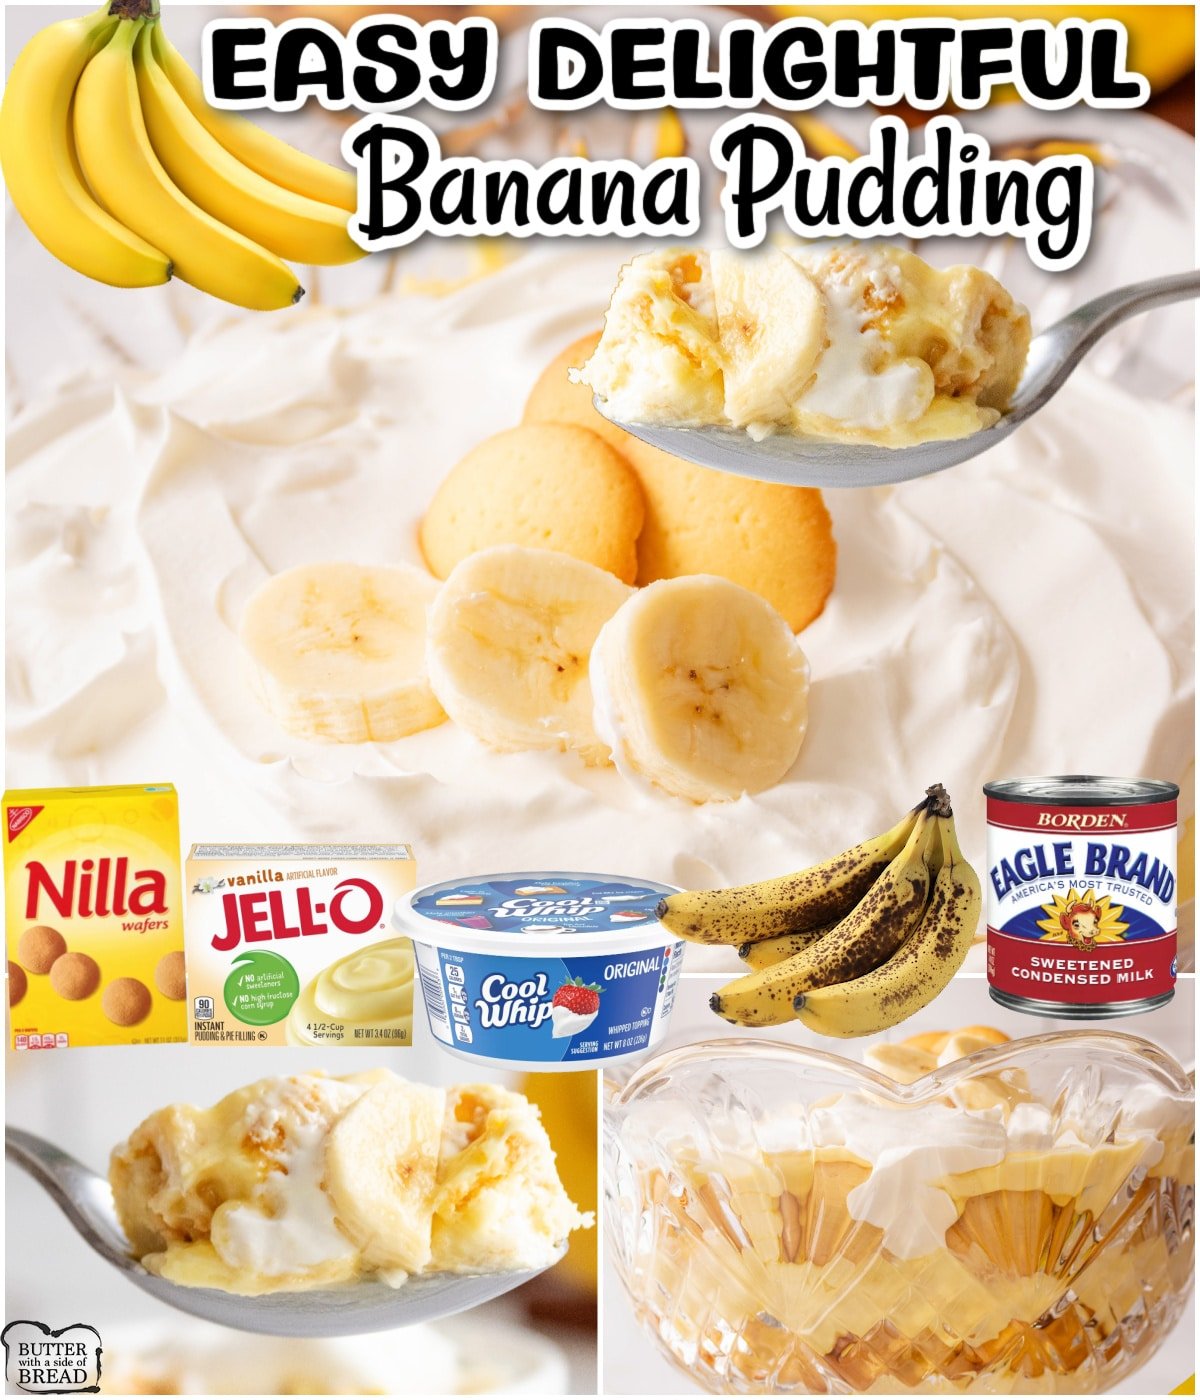 Simple & flavorful Banana Pudding Recipe made with pudding mix, milk, vanilla wafers, condensed milk, whipped topping & fresh bananas. A delightful banana dessert everyone loves! 